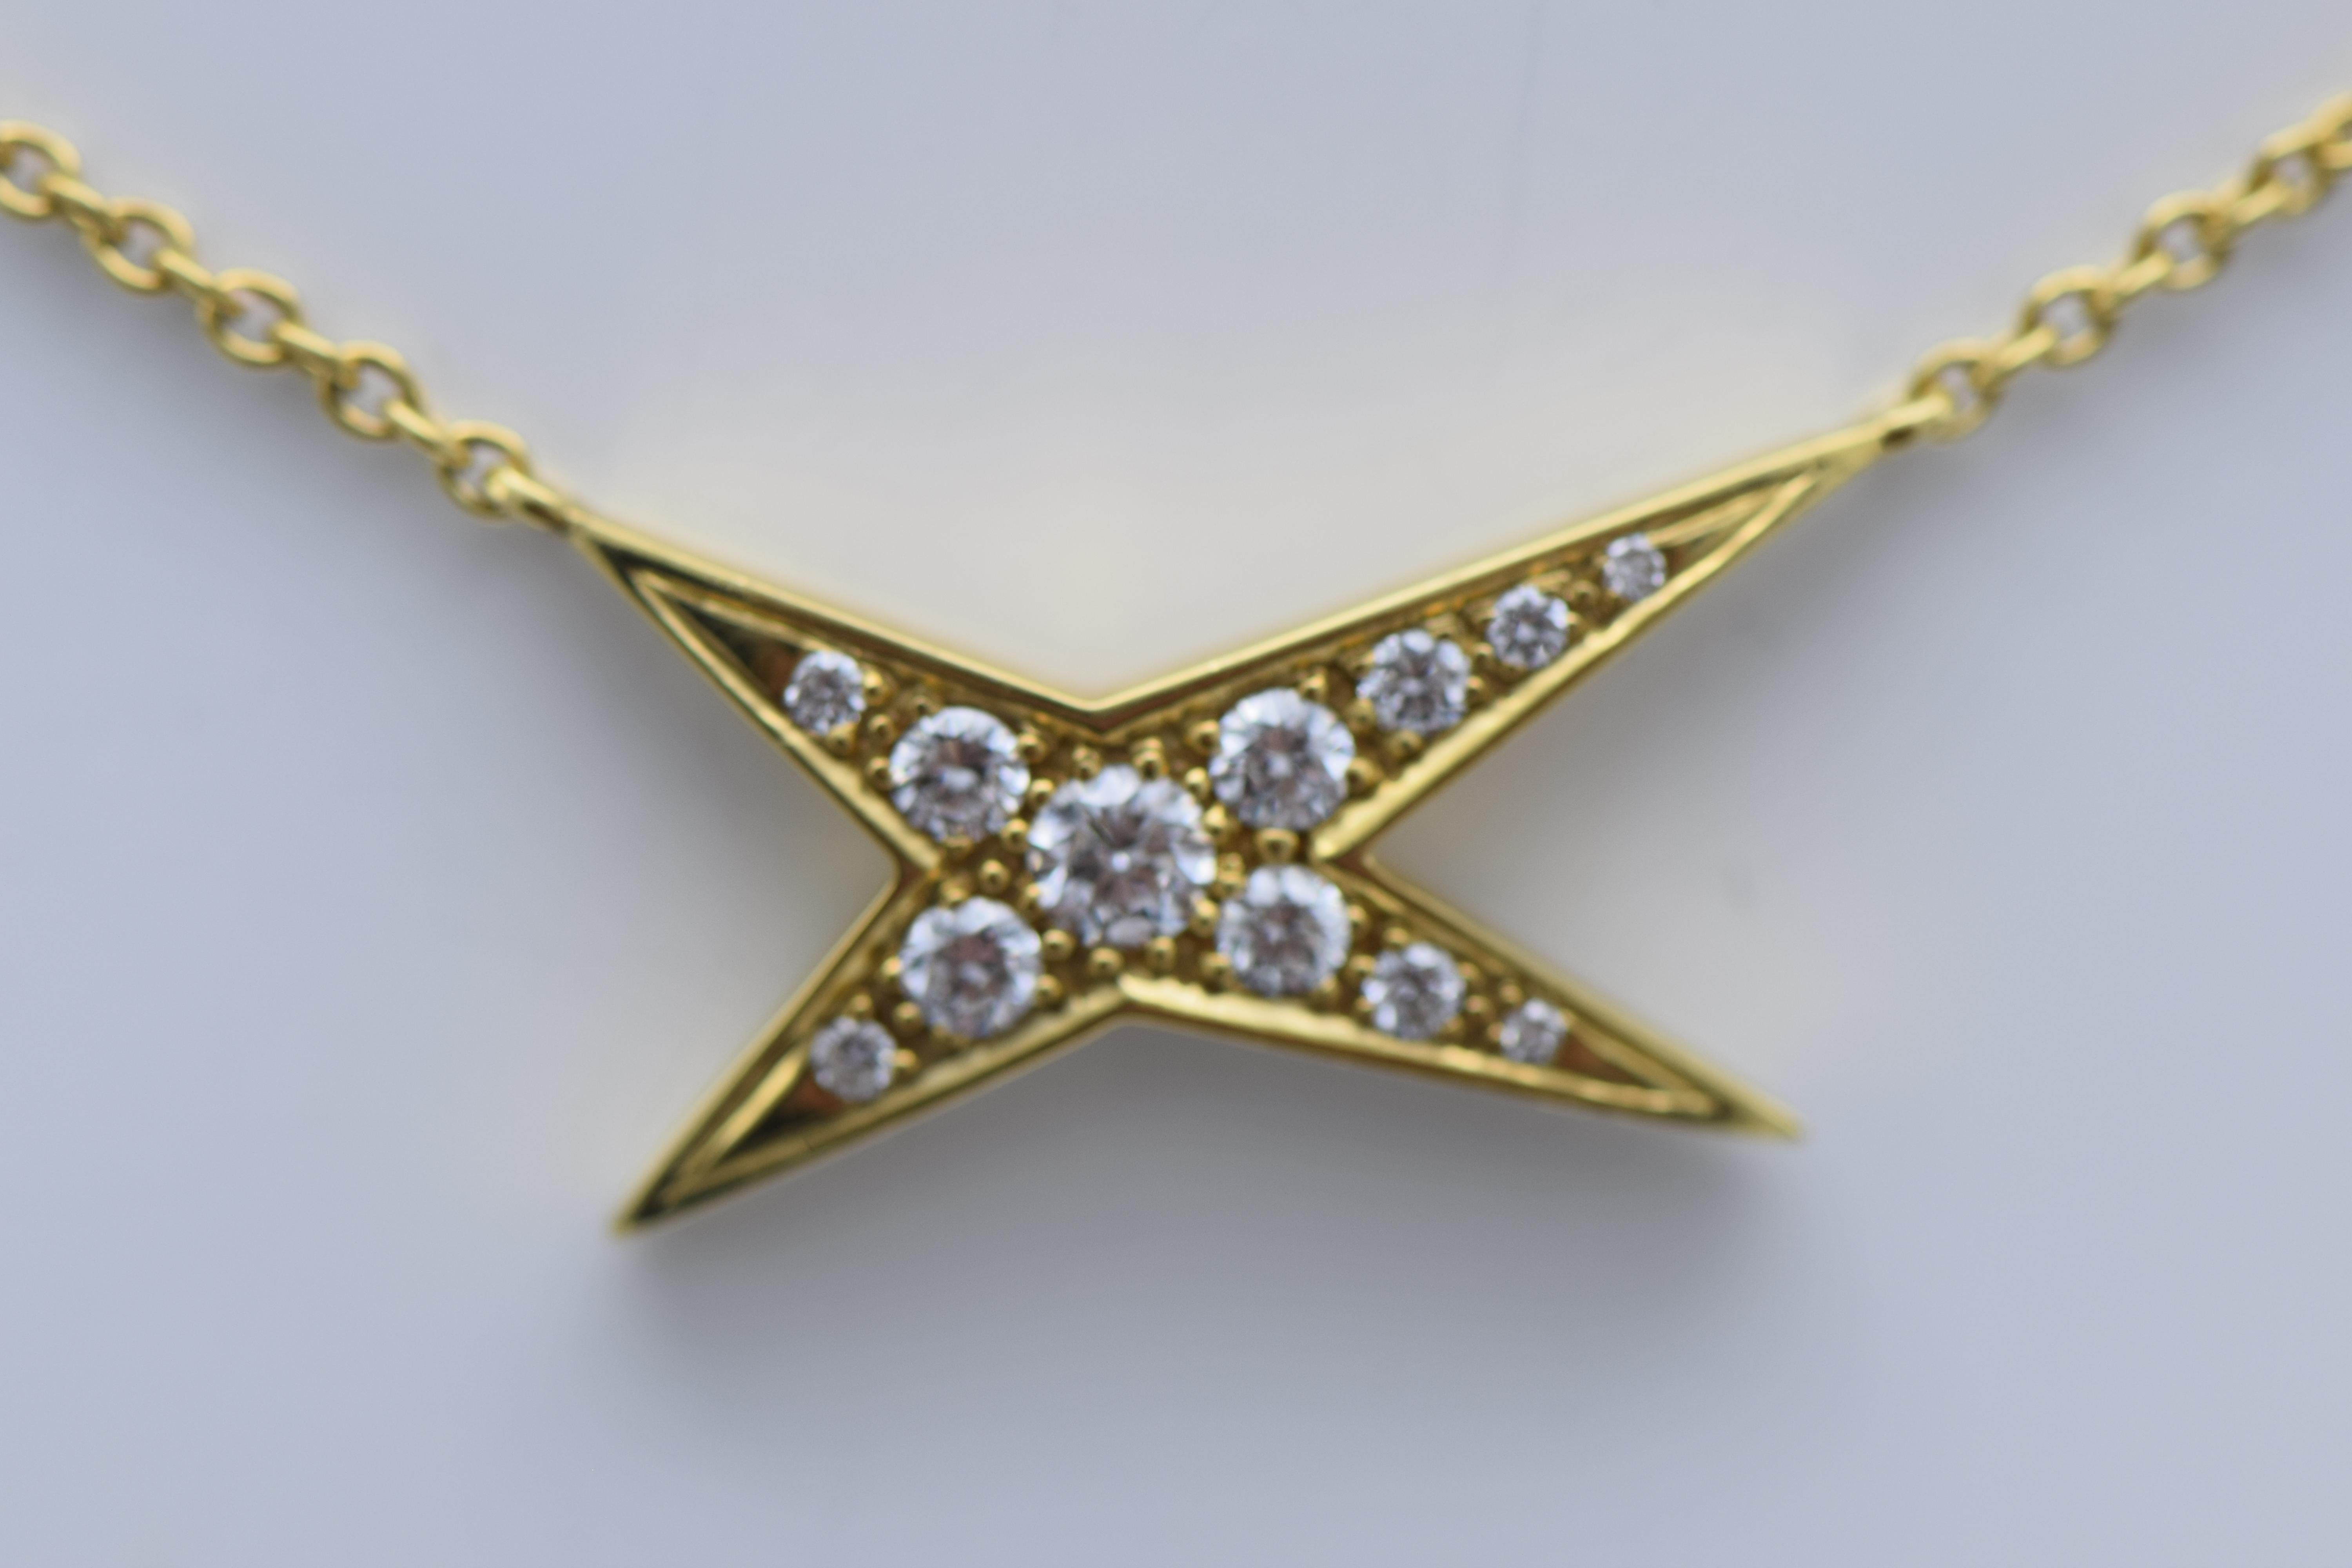 18 karat yellow gold necklace featuring 18 round brilliant cut diamonds approximately 0.75-0.85 carats.  Measuring in overall length 15